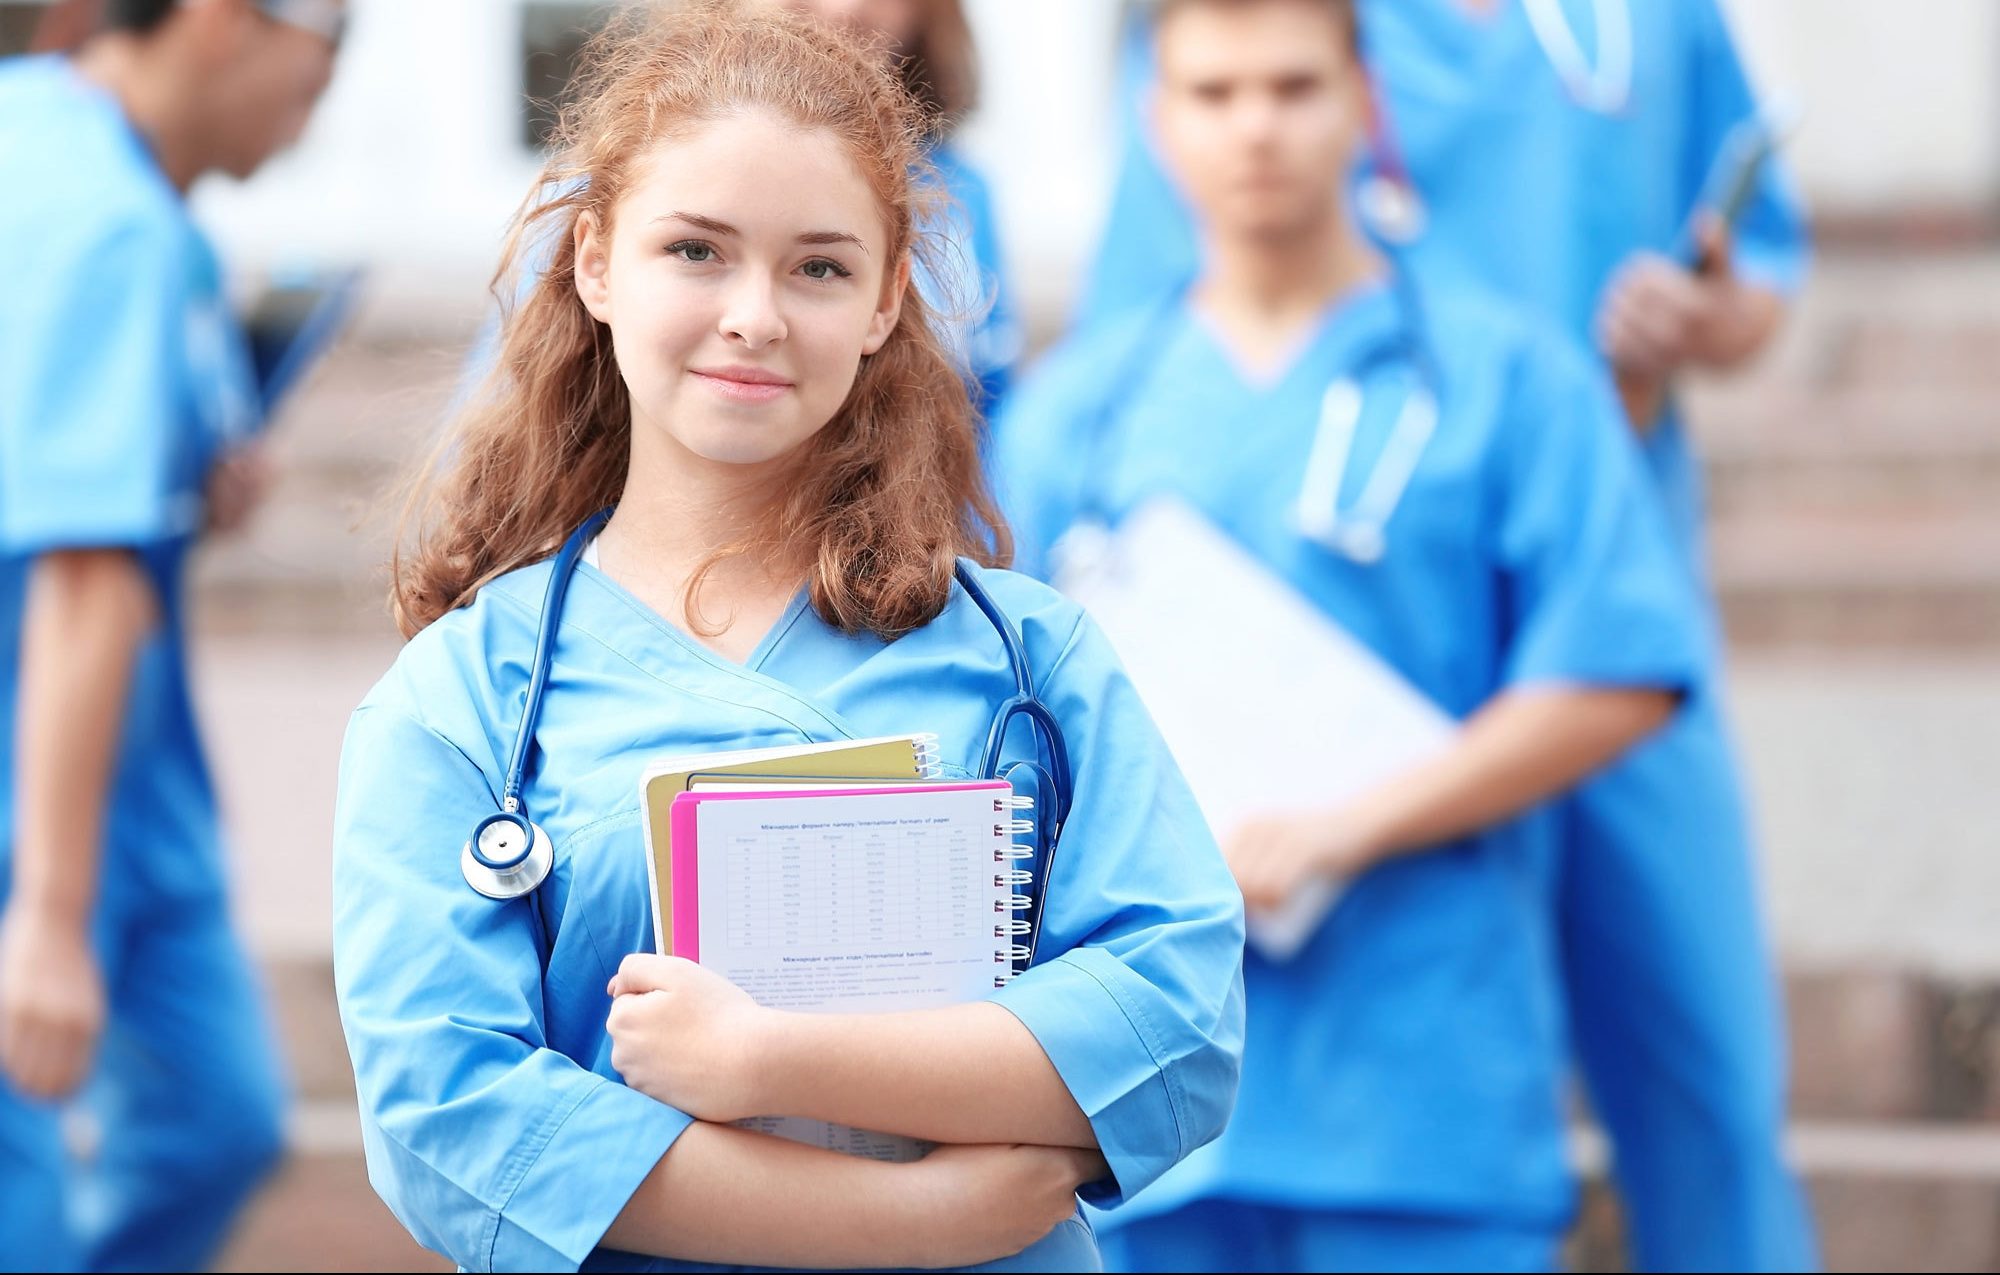 Beckfield College Student Image - Healthcare Career Training -Florence, KY